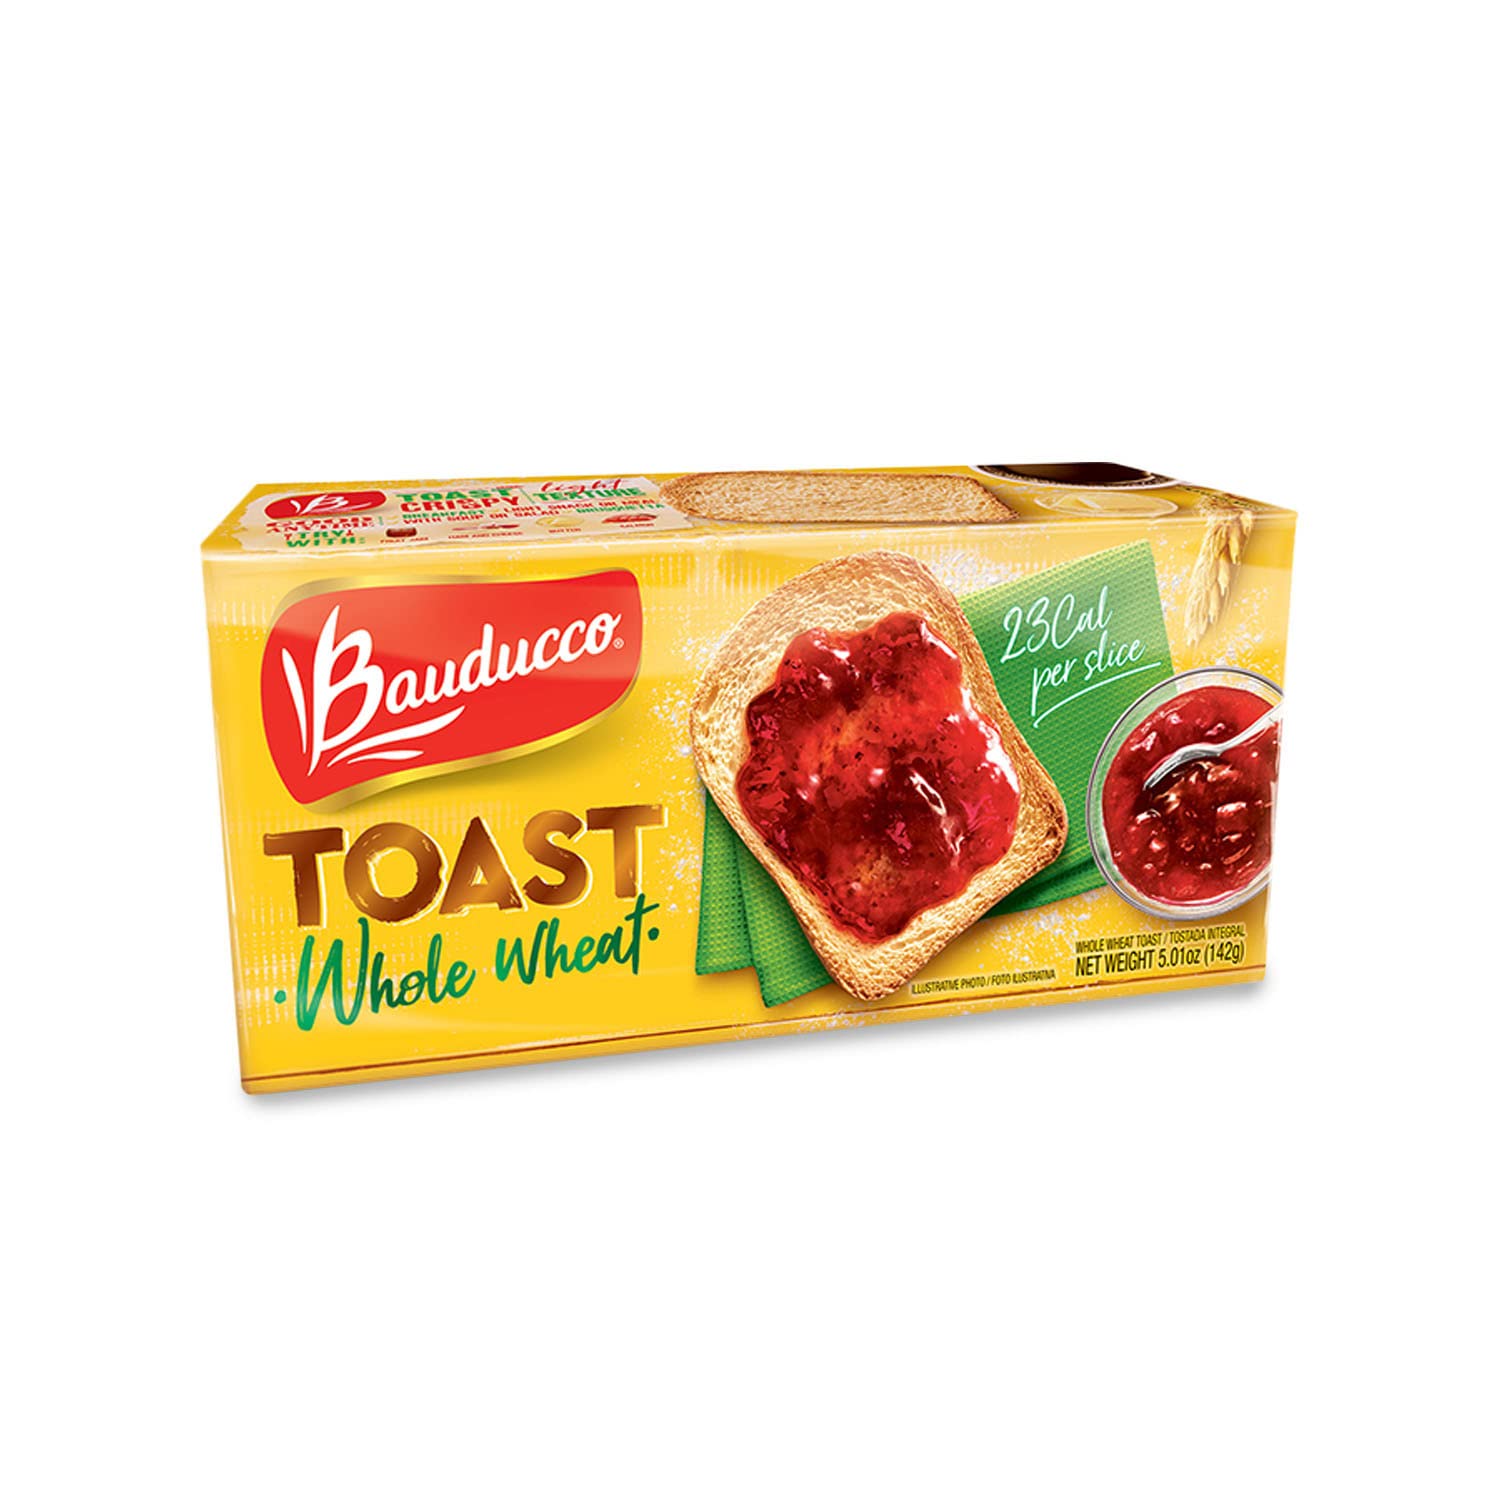 Bauducco Whole Wheat Toast - Delicious, Light & Crispy Toasted Bread - Whole Wheat - Ready-to-Eat Breakfast Toast & Sandwich Bread - No Artificial Flavors - 5.00 oz (Pack of 1)